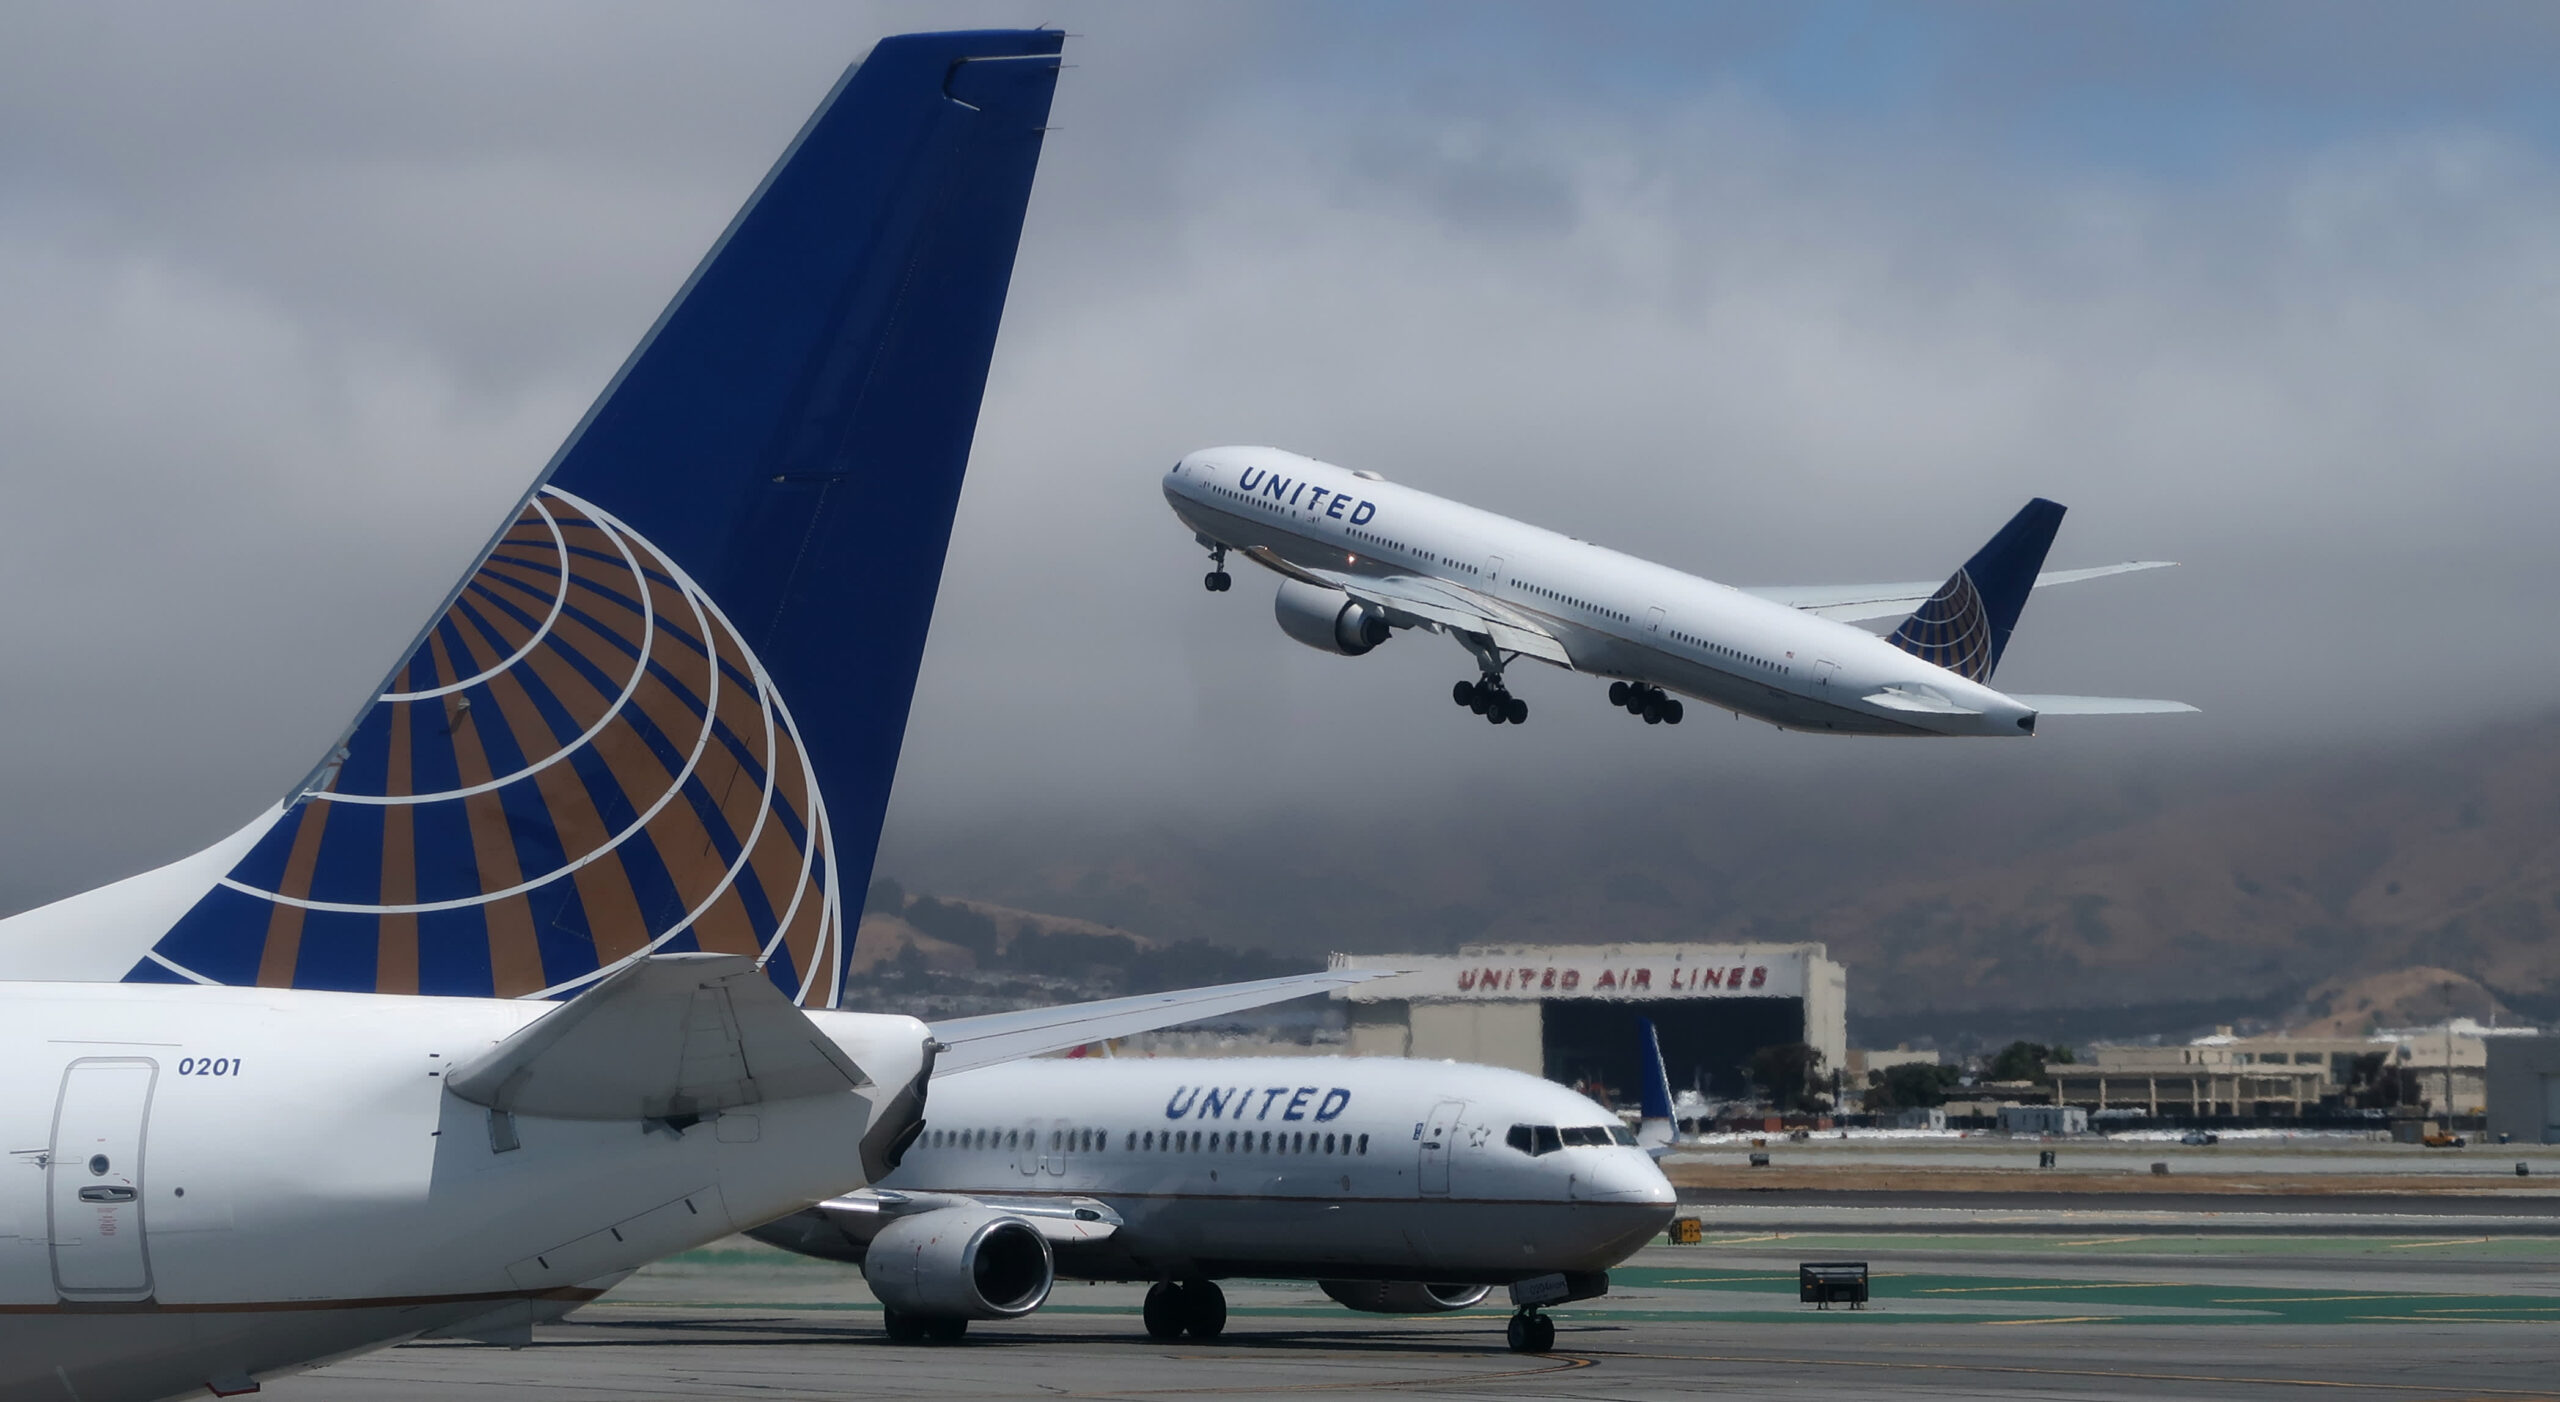 United’s unvaccinated staff drops from 593 to 320 after airline said it would fire them